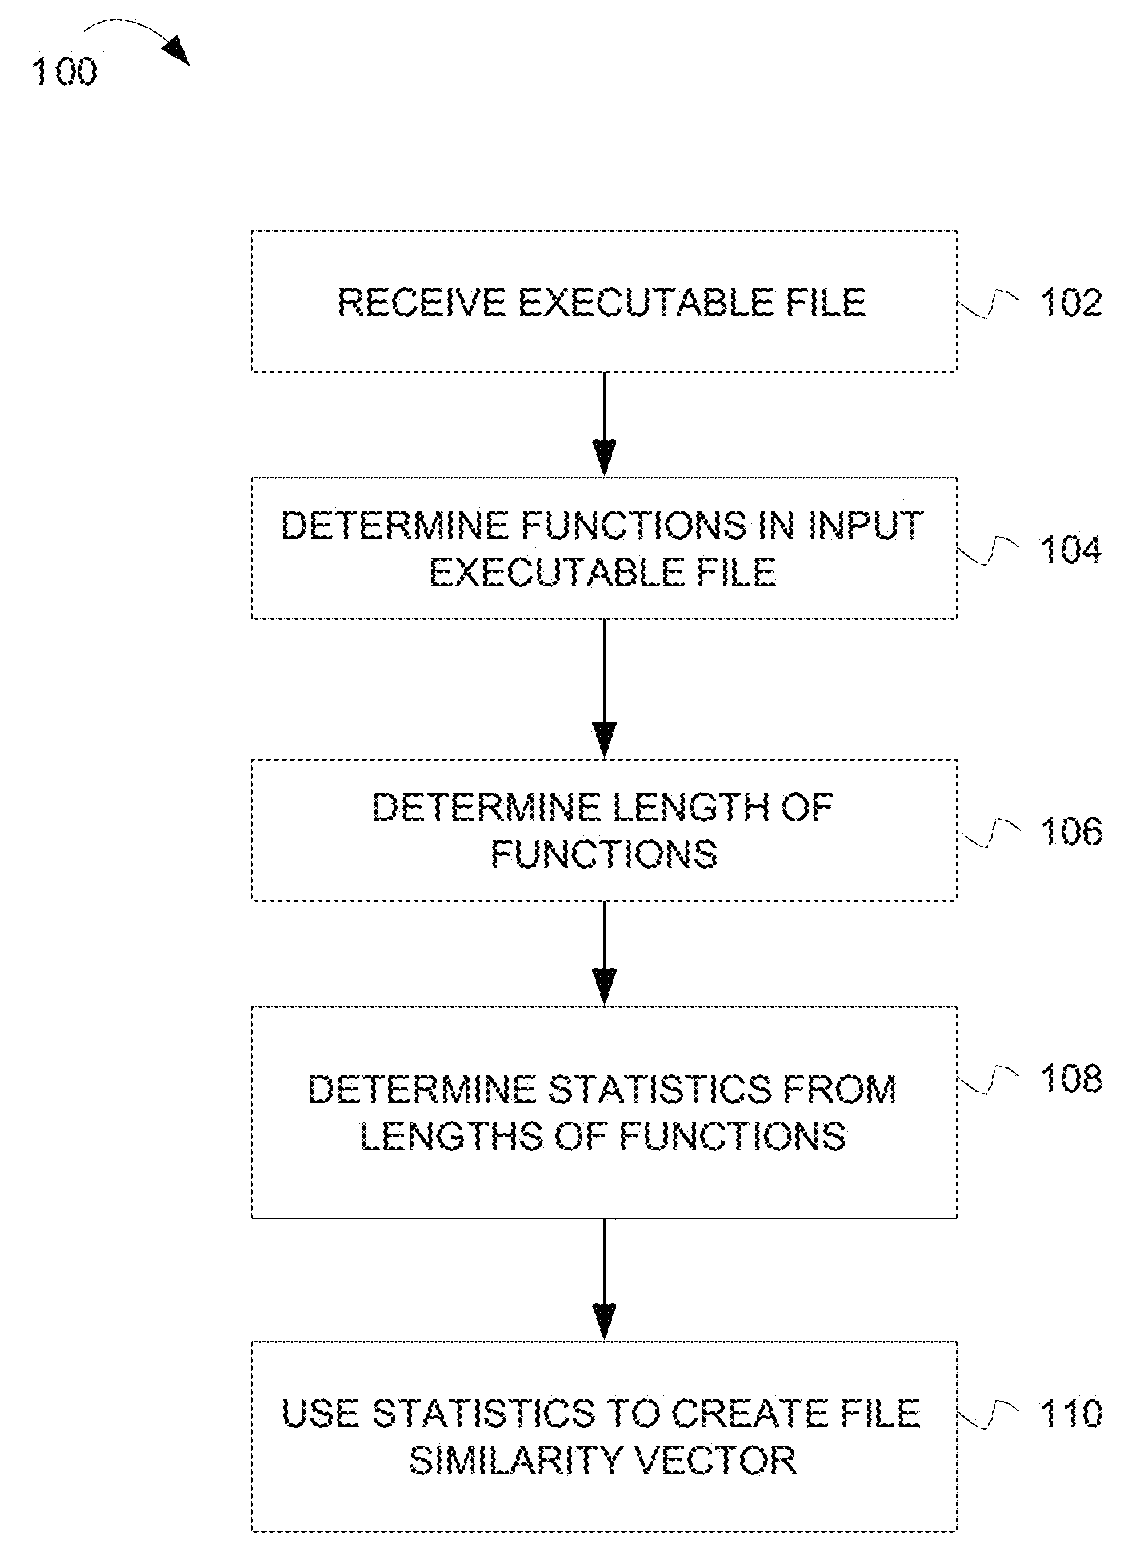 System and method using function length statistics to determine file similarity